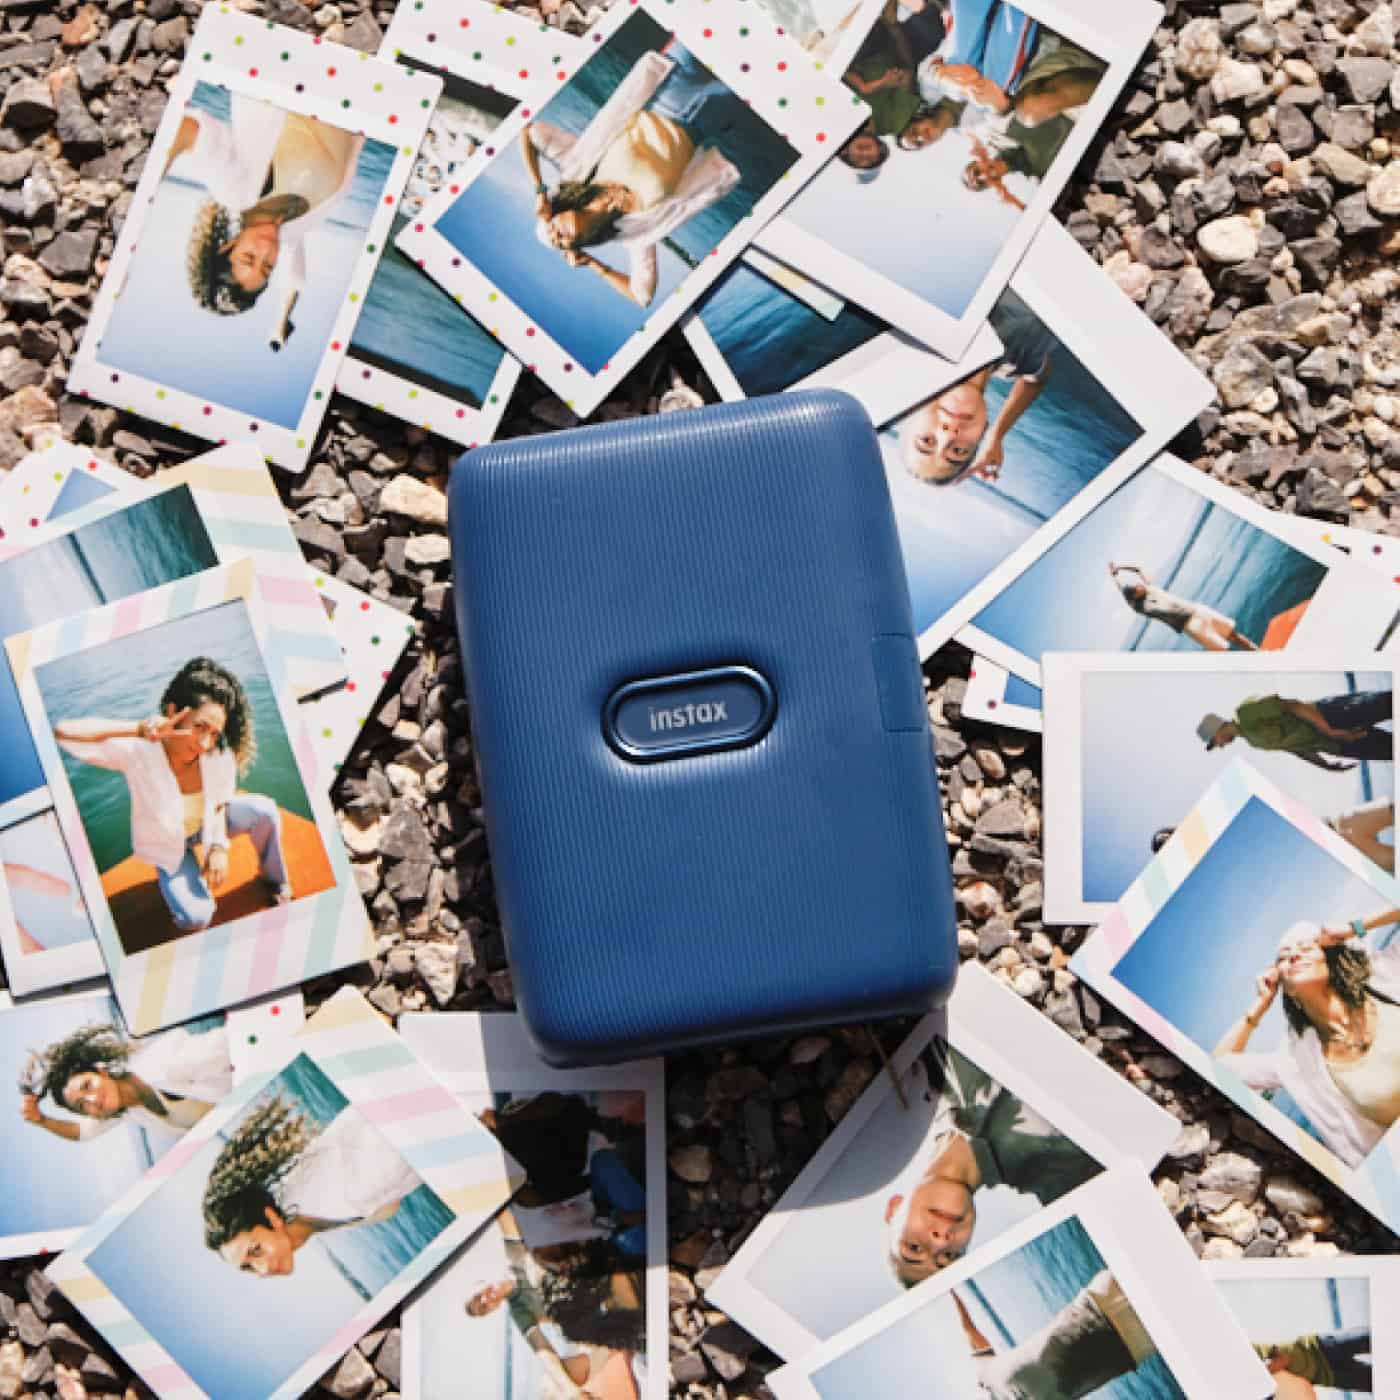 Discover the Best Photo Mini Printer for Your Creative Needs